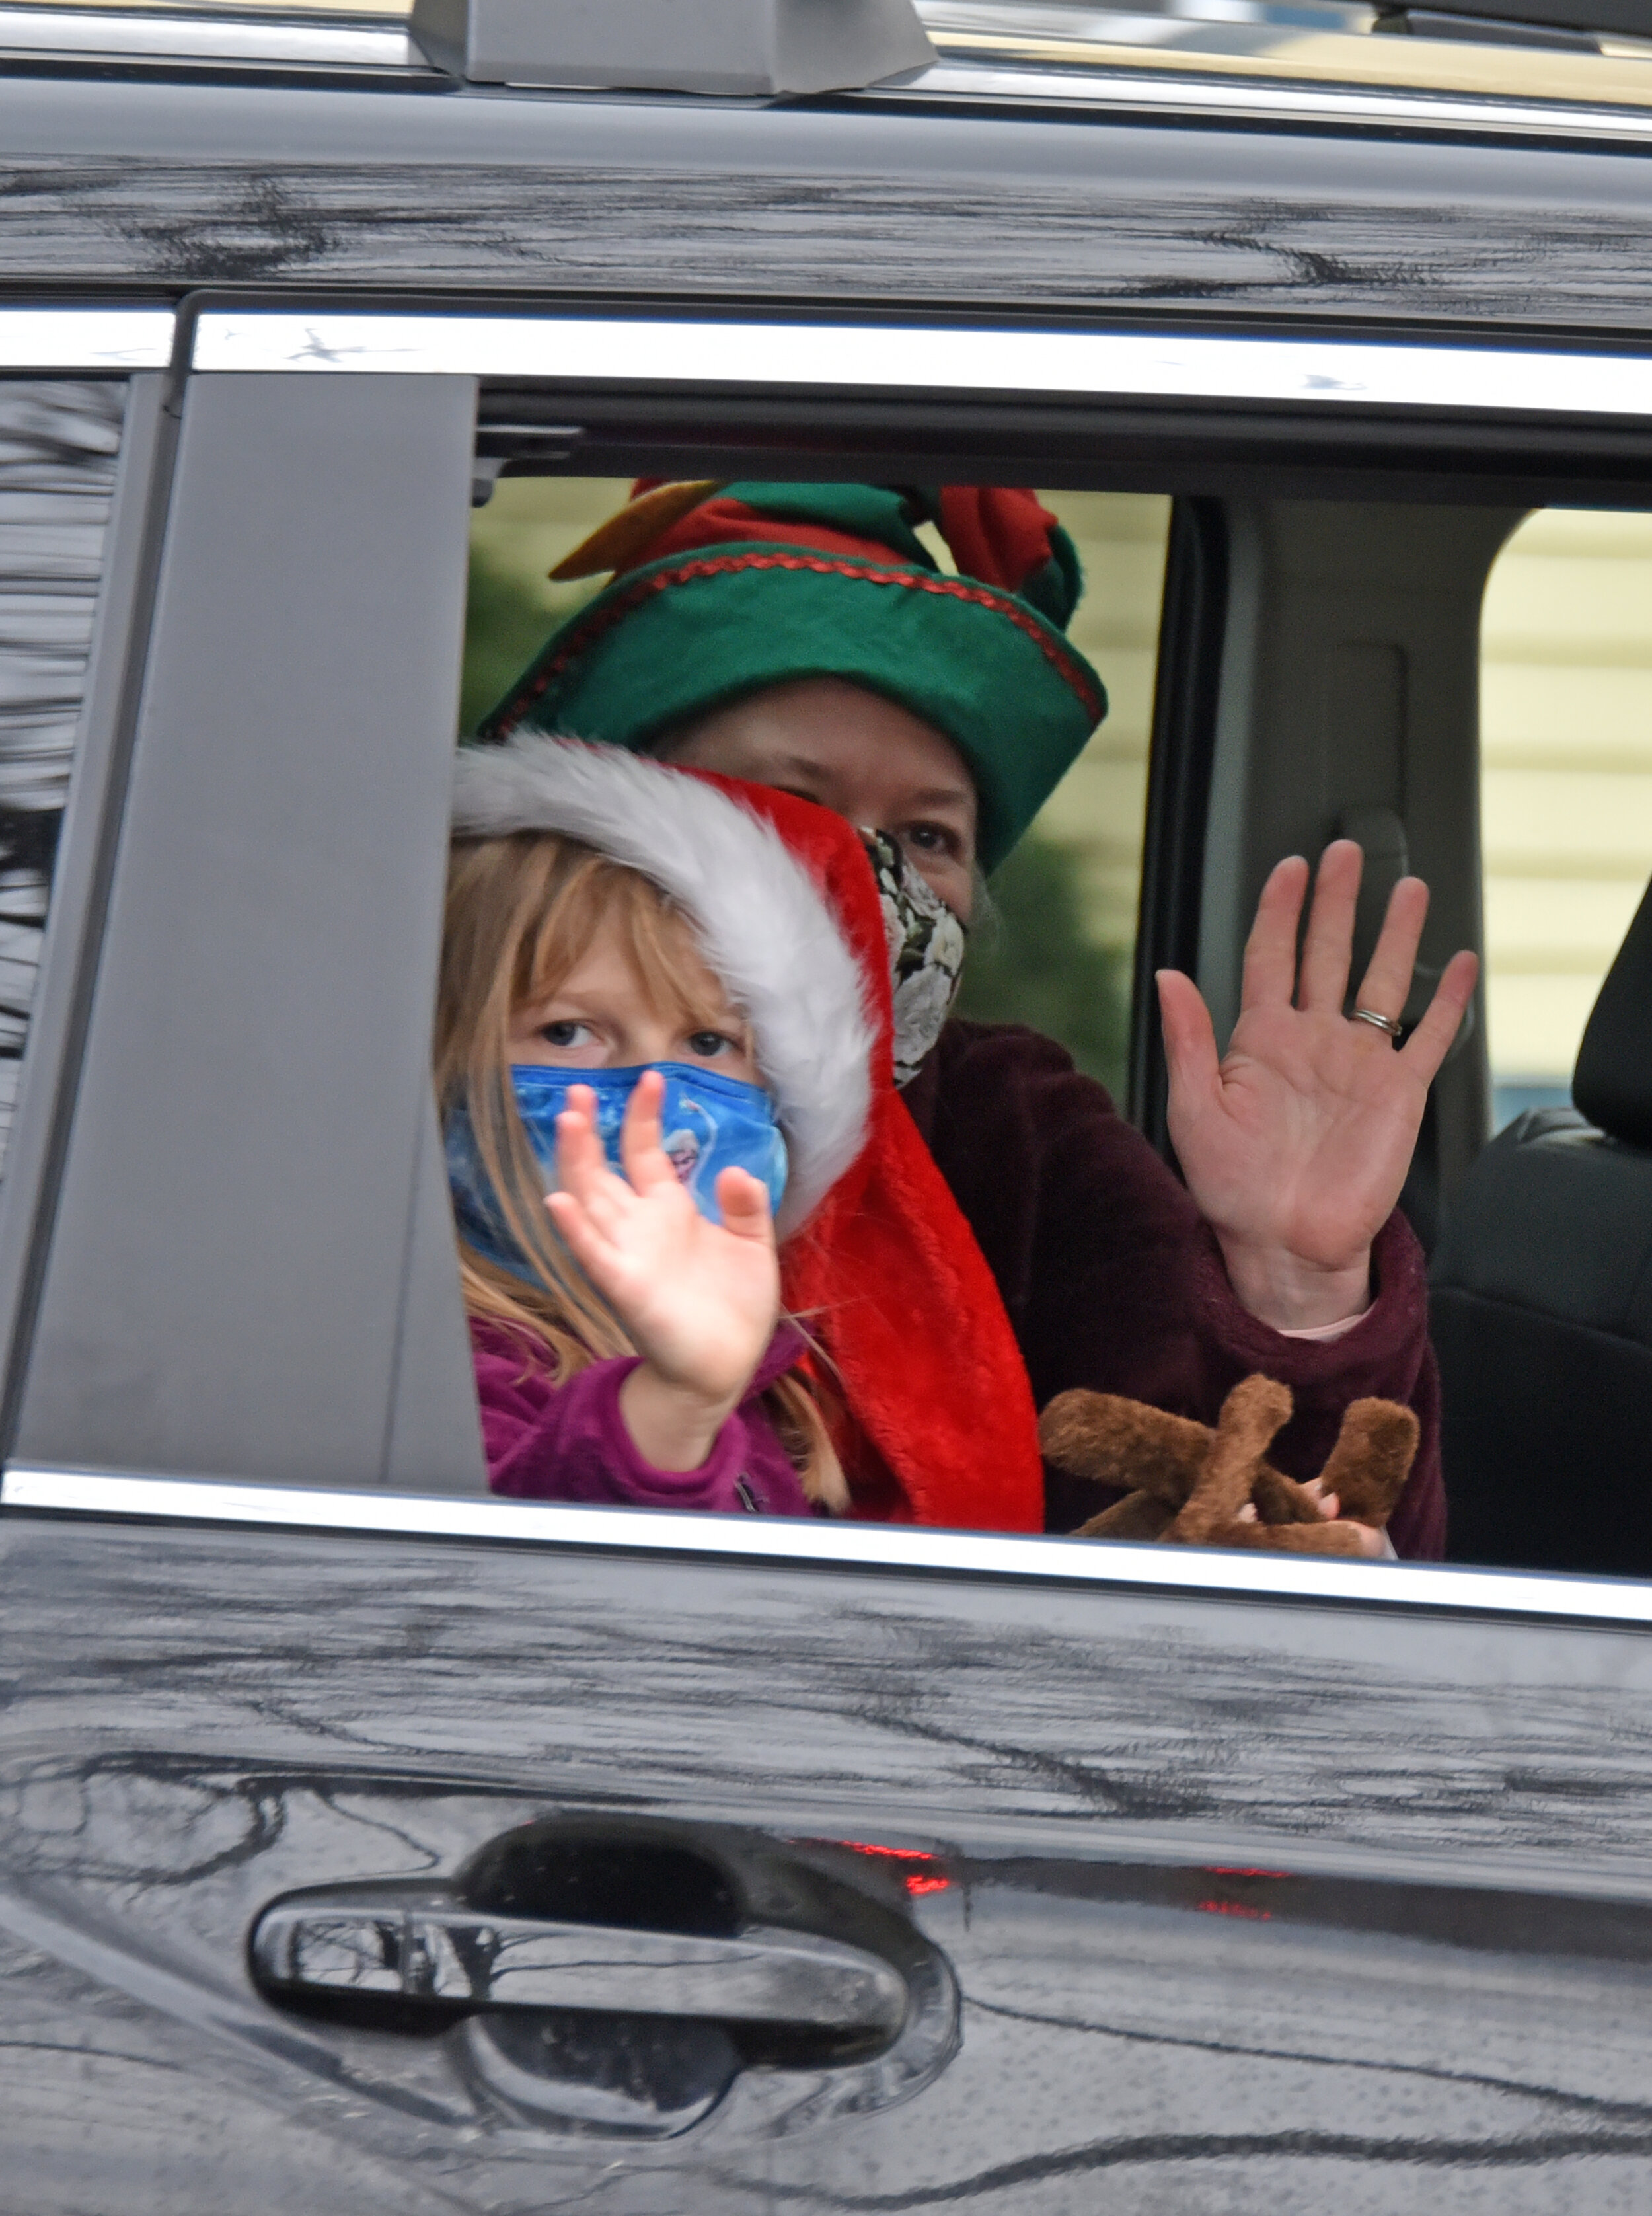   Kids and Santa settle for honks and waves this year to avoid close contact during the pandemic. Photo by Gordon Miller.  